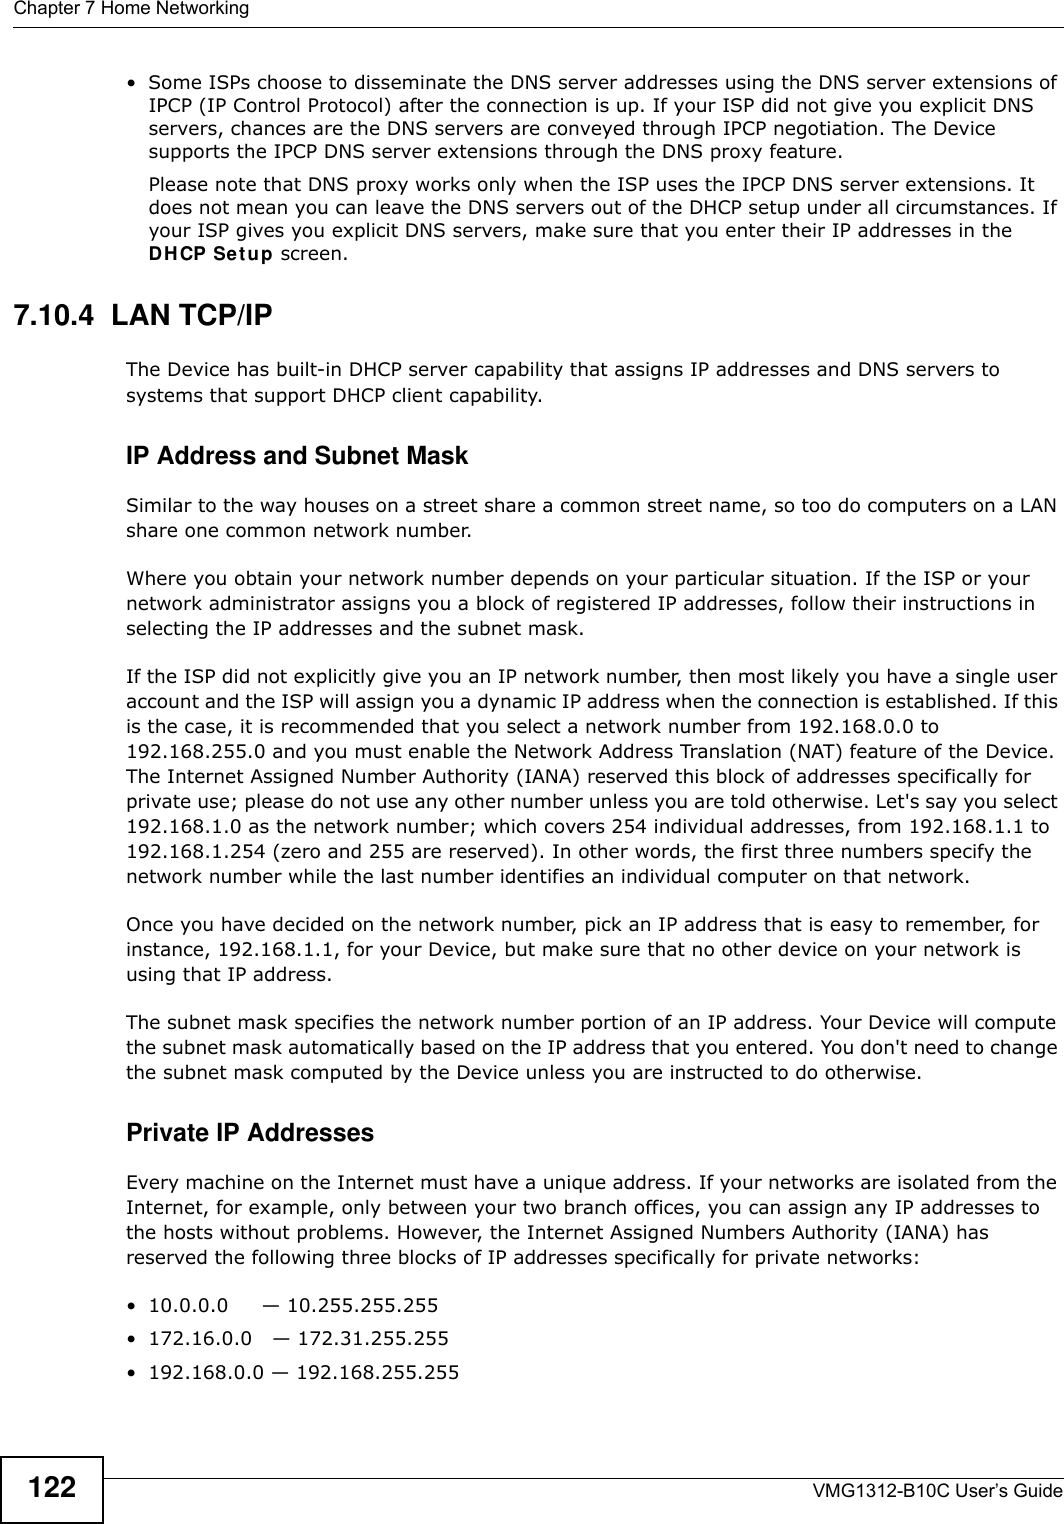 Chapter 7 Home NetworkingVMG1312-B10C User’s Guide122• Some ISPs choose to disseminate the DNS server addresses using the DNS server extensions of IPCP (IP Control Protocol) after the connection is up. If your ISP did not give you explicit DNS servers, chances are the DNS servers are conveyed through IPCP negotiation. The Device supports the IPCP DNS server extensions through the DNS proxy feature.Please note that DNS proxy works only when the ISP uses the IPCP DNS server extensions. It does not mean you can leave the DNS servers out of the DHCP setup under all circumstances. If your ISP gives you explicit DNS servers, make sure that you enter their IP addresses in the DH CP Se t up screen.7.10.4  LAN TCP/IP The Device has built-in DHCP server capability that assigns IP addresses and DNS servers to systems that support DHCP client capability.IP Address and Subnet MaskSimilar to the way houses on a street share a common street name, so too do computers on a LAN share one common network number.Where you obtain your network number depends on your particular situation. If the ISP or your network administrator assigns you a block of registered IP addresses, follow their instructions in selecting the IP addresses and the subnet mask.If the ISP did not explicitly give you an IP network number, then most likely you have a single user account and the ISP will assign you a dynamic IP address when the connection is established. If this is the case, it is recommended that you select a network number from 192.168.0.0 to 192.168.255.0 and you must enable the Network Address Translation (NAT) feature of the Device. The Internet Assigned Number Authority (IANA) reserved this block of addresses specifically for private use; please do not use any other number unless you are told otherwise. Let&apos;s say you select 192.168.1.0 as the network number; which covers 254 individual addresses, from 192.168.1.1 to 192.168.1.254 (zero and 255 are reserved). In other words, the first three numbers specify the network number while the last number identifies an individual computer on that network.Once you have decided on the network number, pick an IP address that is easy to remember, for instance, 192.168.1.1, for your Device, but make sure that no other device on your network is using that IP address.The subnet mask specifies the network number portion of an IP address. Your Device will compute the subnet mask automatically based on the IP address that you entered. You don&apos;t need to change the subnet mask computed by the Device unless you are instructed to do otherwise.Private IP AddressesEvery machine on the Internet must have a unique address. If your networks are isolated from the Internet, for example, only between your two branch offices, you can assign any IP addresses to the hosts without problems. However, the Internet Assigned Numbers Authority (IANA) has reserved the following three blocks of IP addresses specifically for private networks:• 10.0.0.0     — 10.255.255.255• 172.16.0.0   — 172.31.255.255• 192.168.0.0 — 192.168.255.255